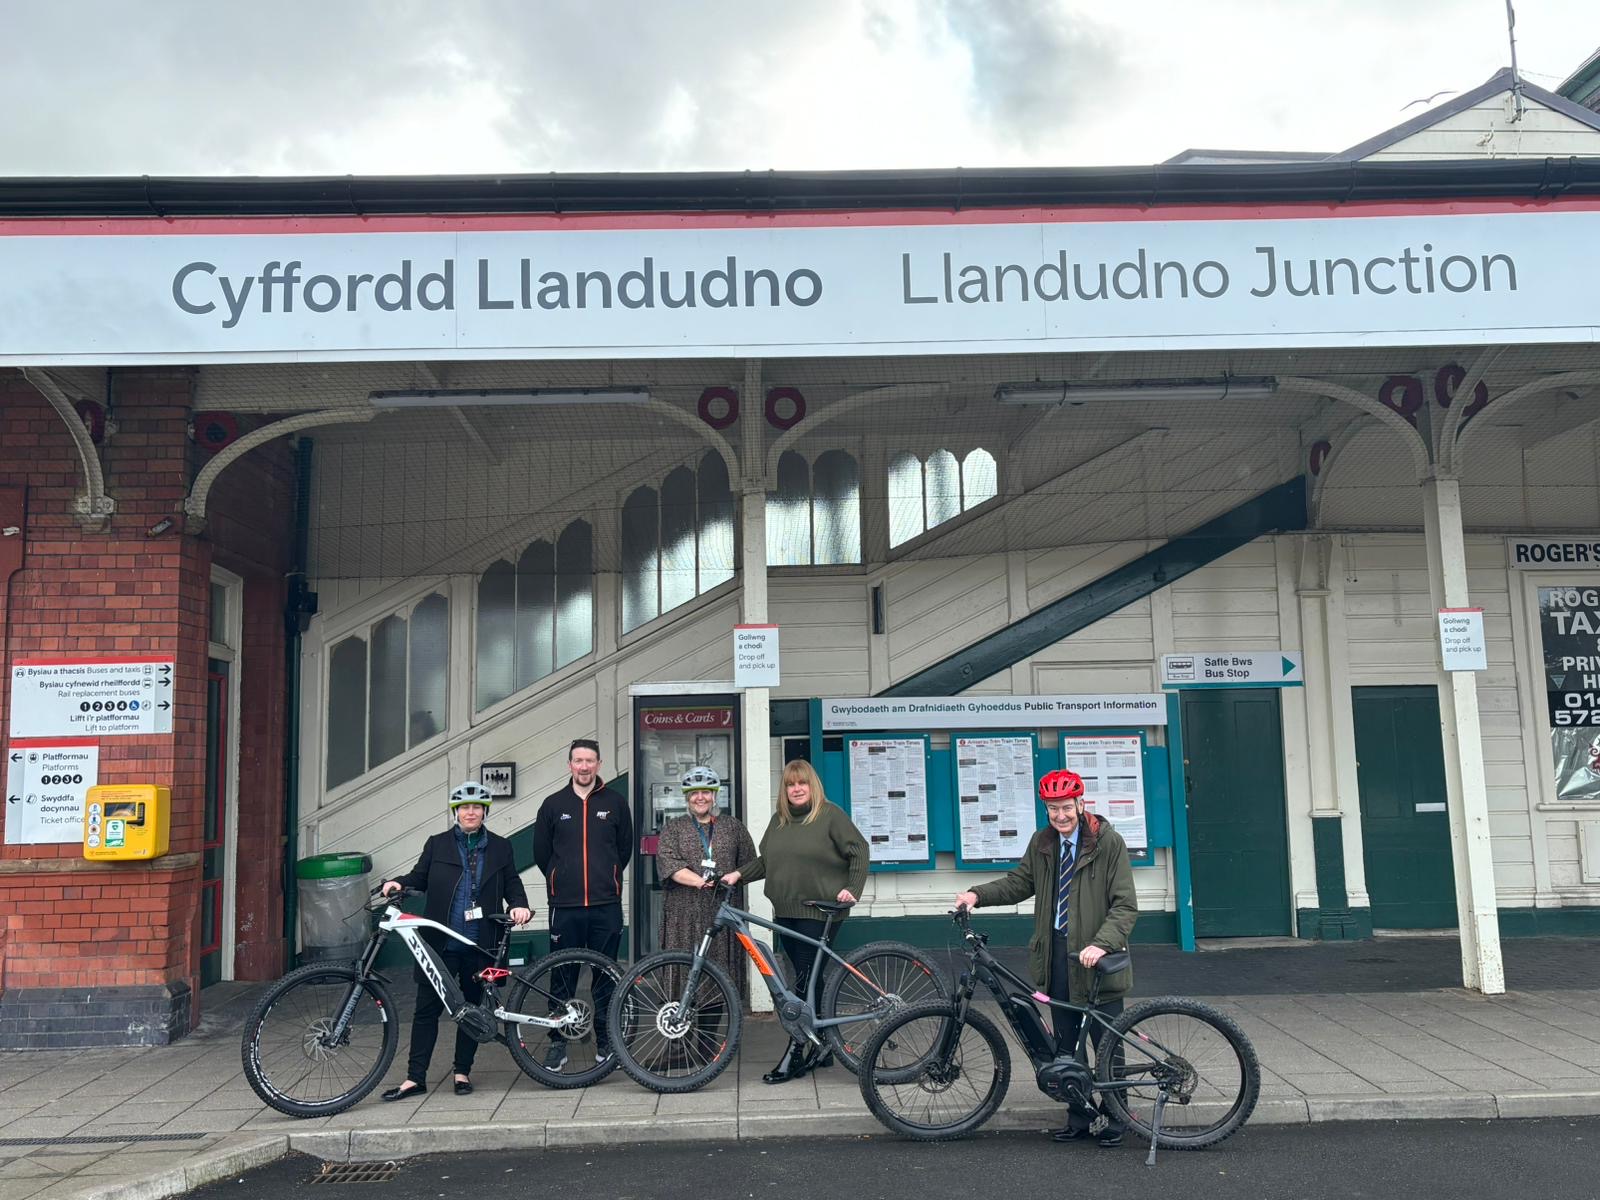 Group of cyclists standing in front of Llandudno Junction railway station.